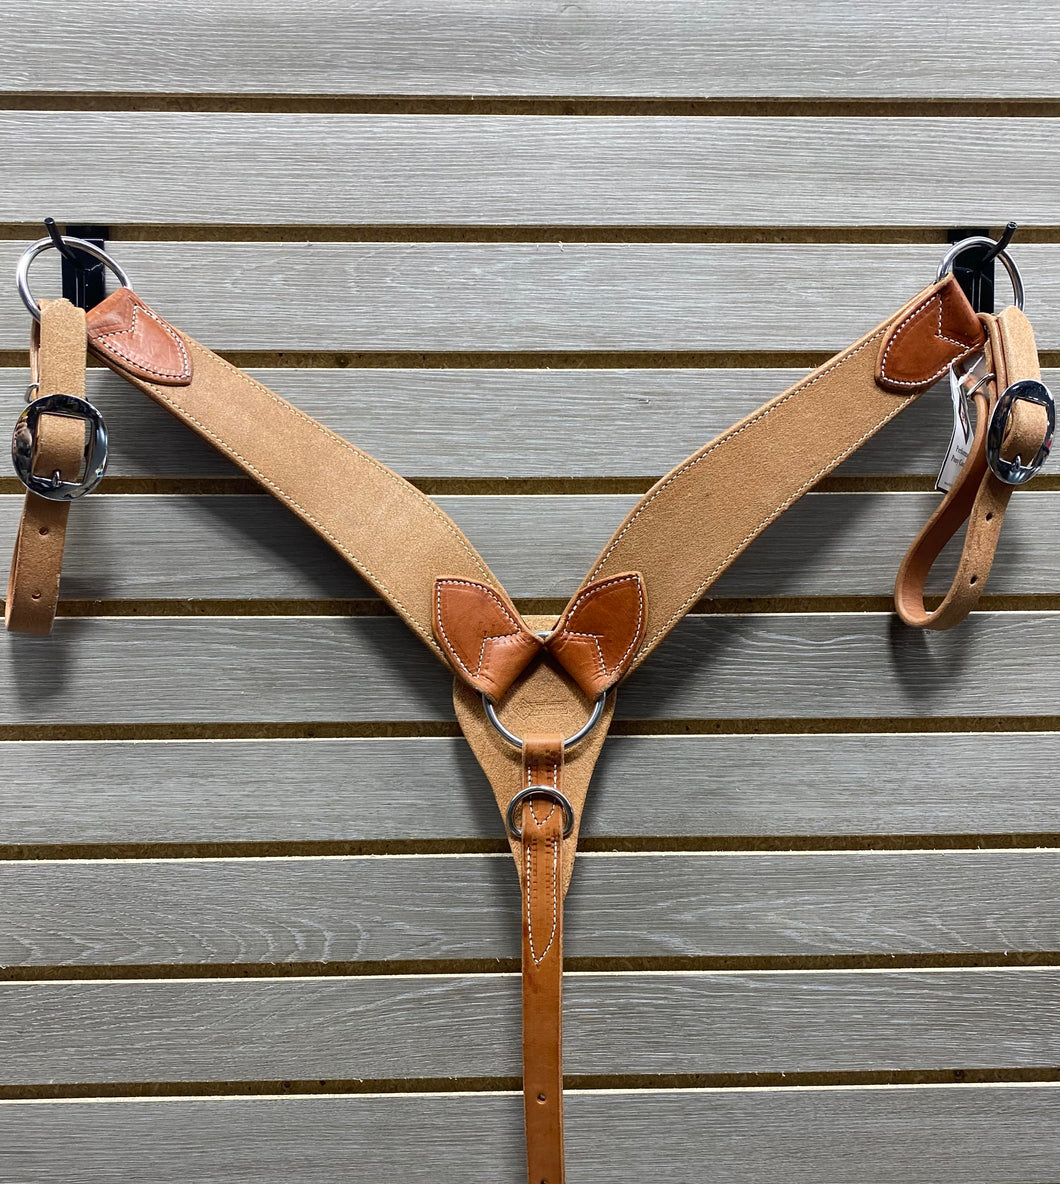 Performance Pony Breastcollar - Simple Roughout Leather